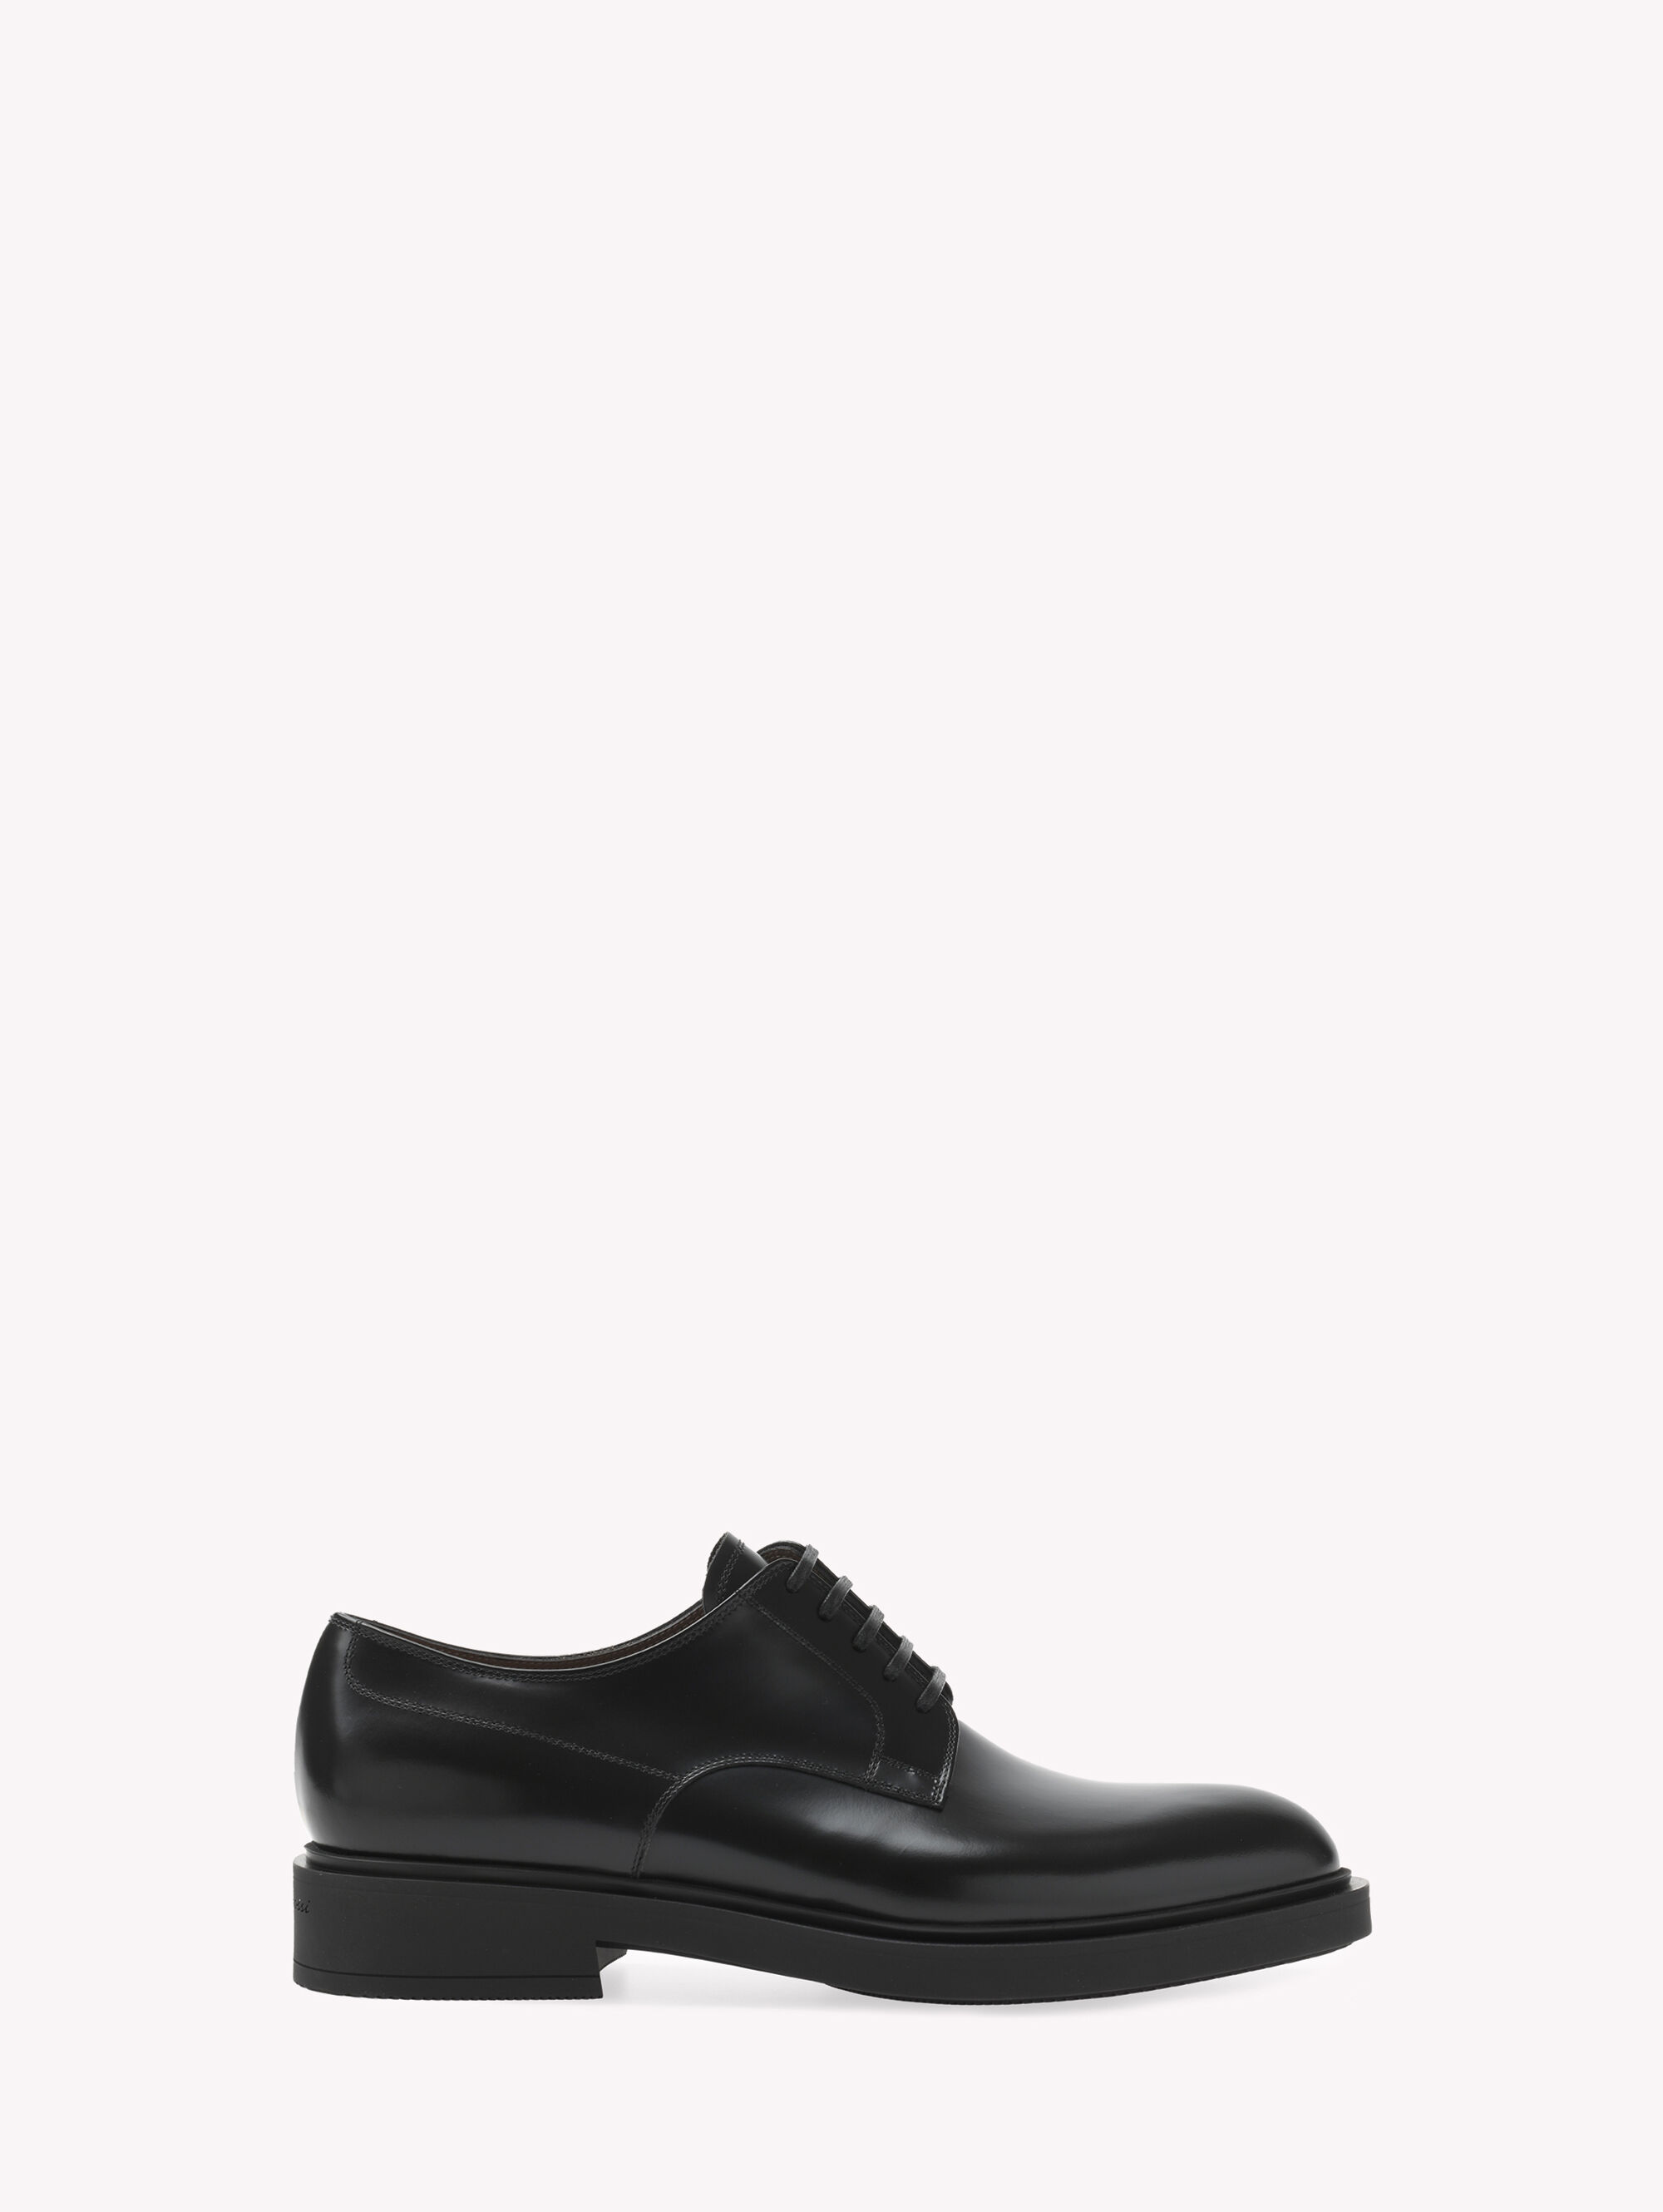 WILLIAM: Formal Shoes for Man | Gianvito Rossi